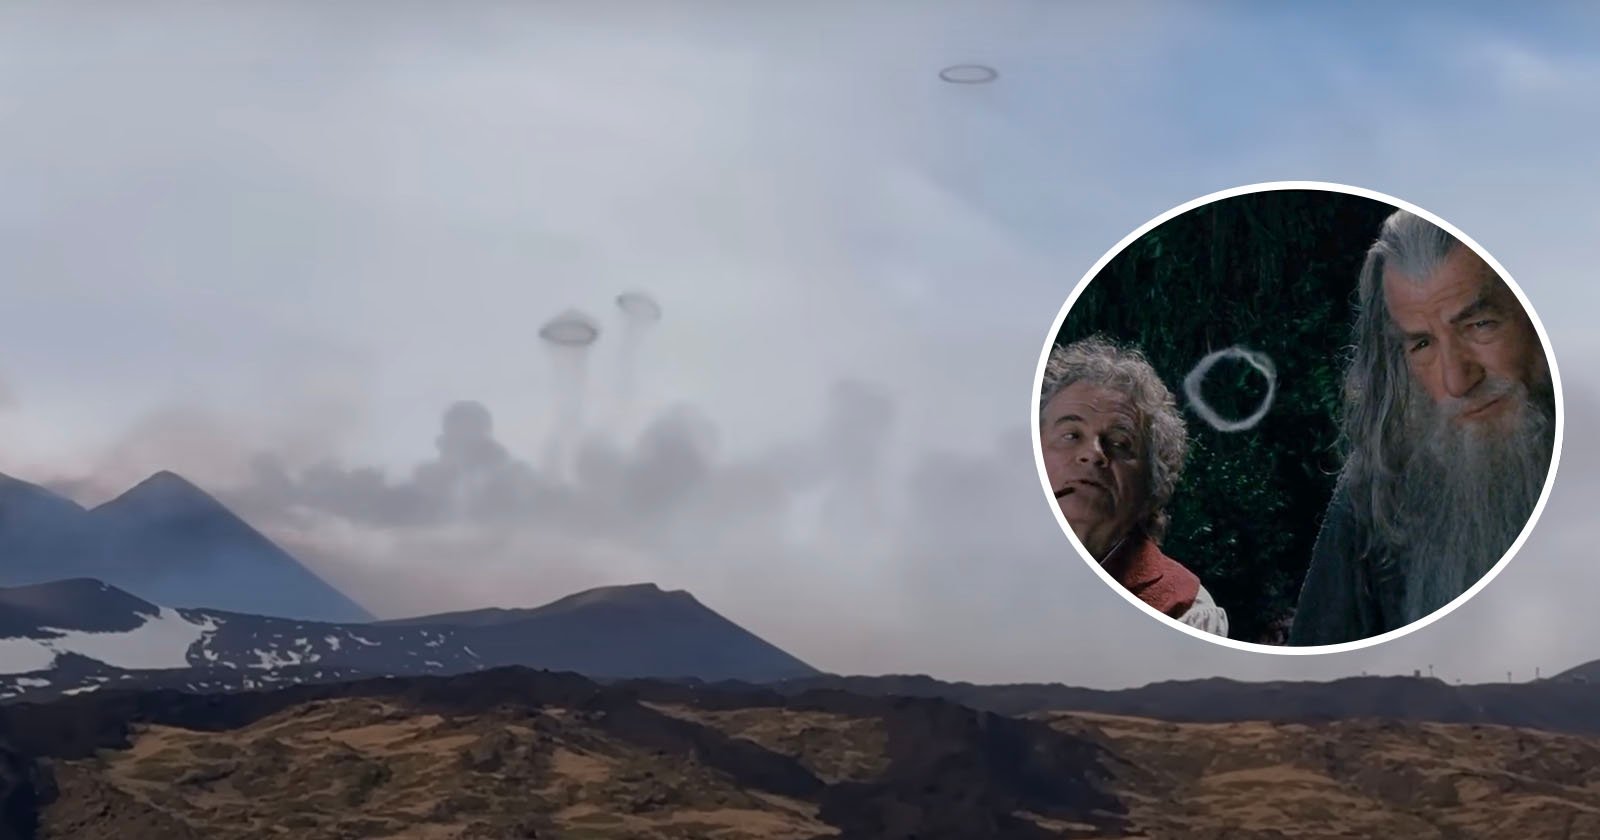 Composite image featuring a landscape with Mount Etna and three flying saucers in the sky, and an inset showing a close-up of gandalf the grey from the lord of the rings, looking contemplative.